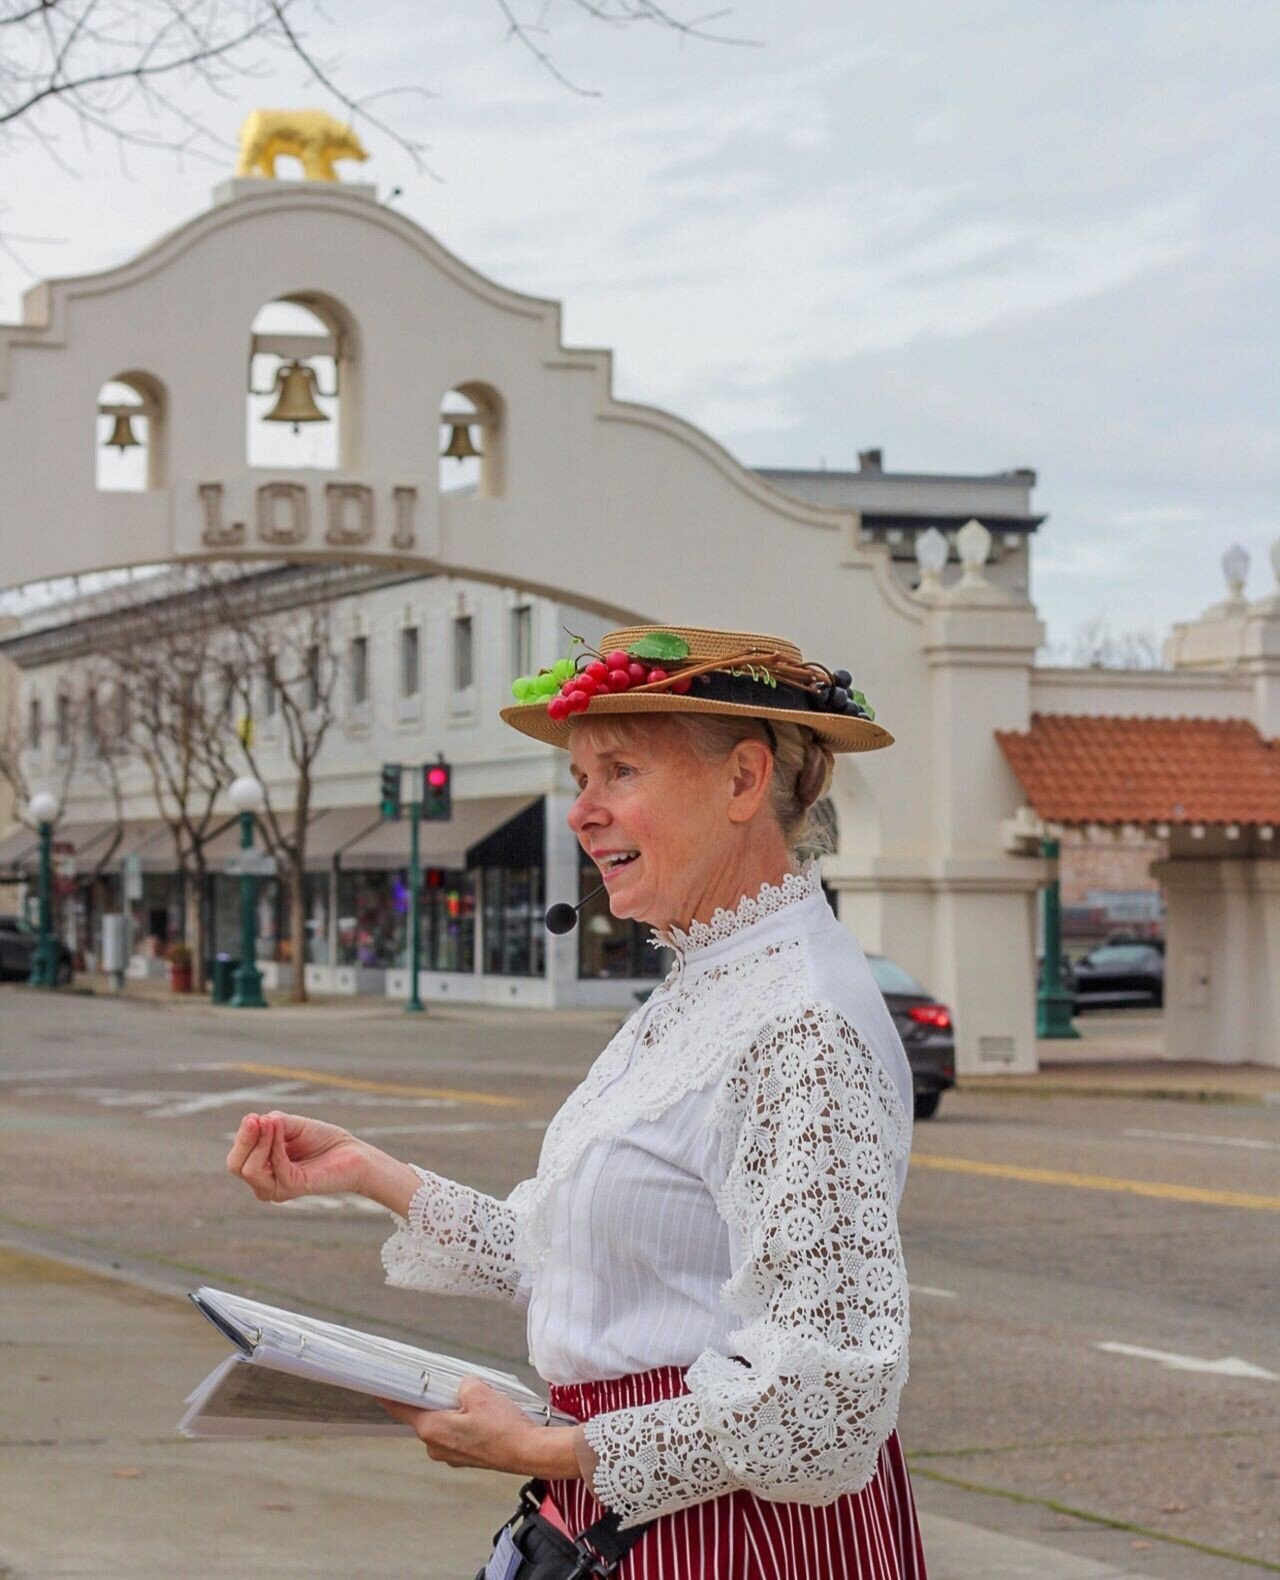 We learned soo many cool things about Downtown Lodi from the Explore Lodi walking tour! Thank you to our lovely tour guide, Alane, from the Lodi Historical Society for showing us around our hometown with new eyes. 🤩 ⁠
⁠
The tour weaves through Downt